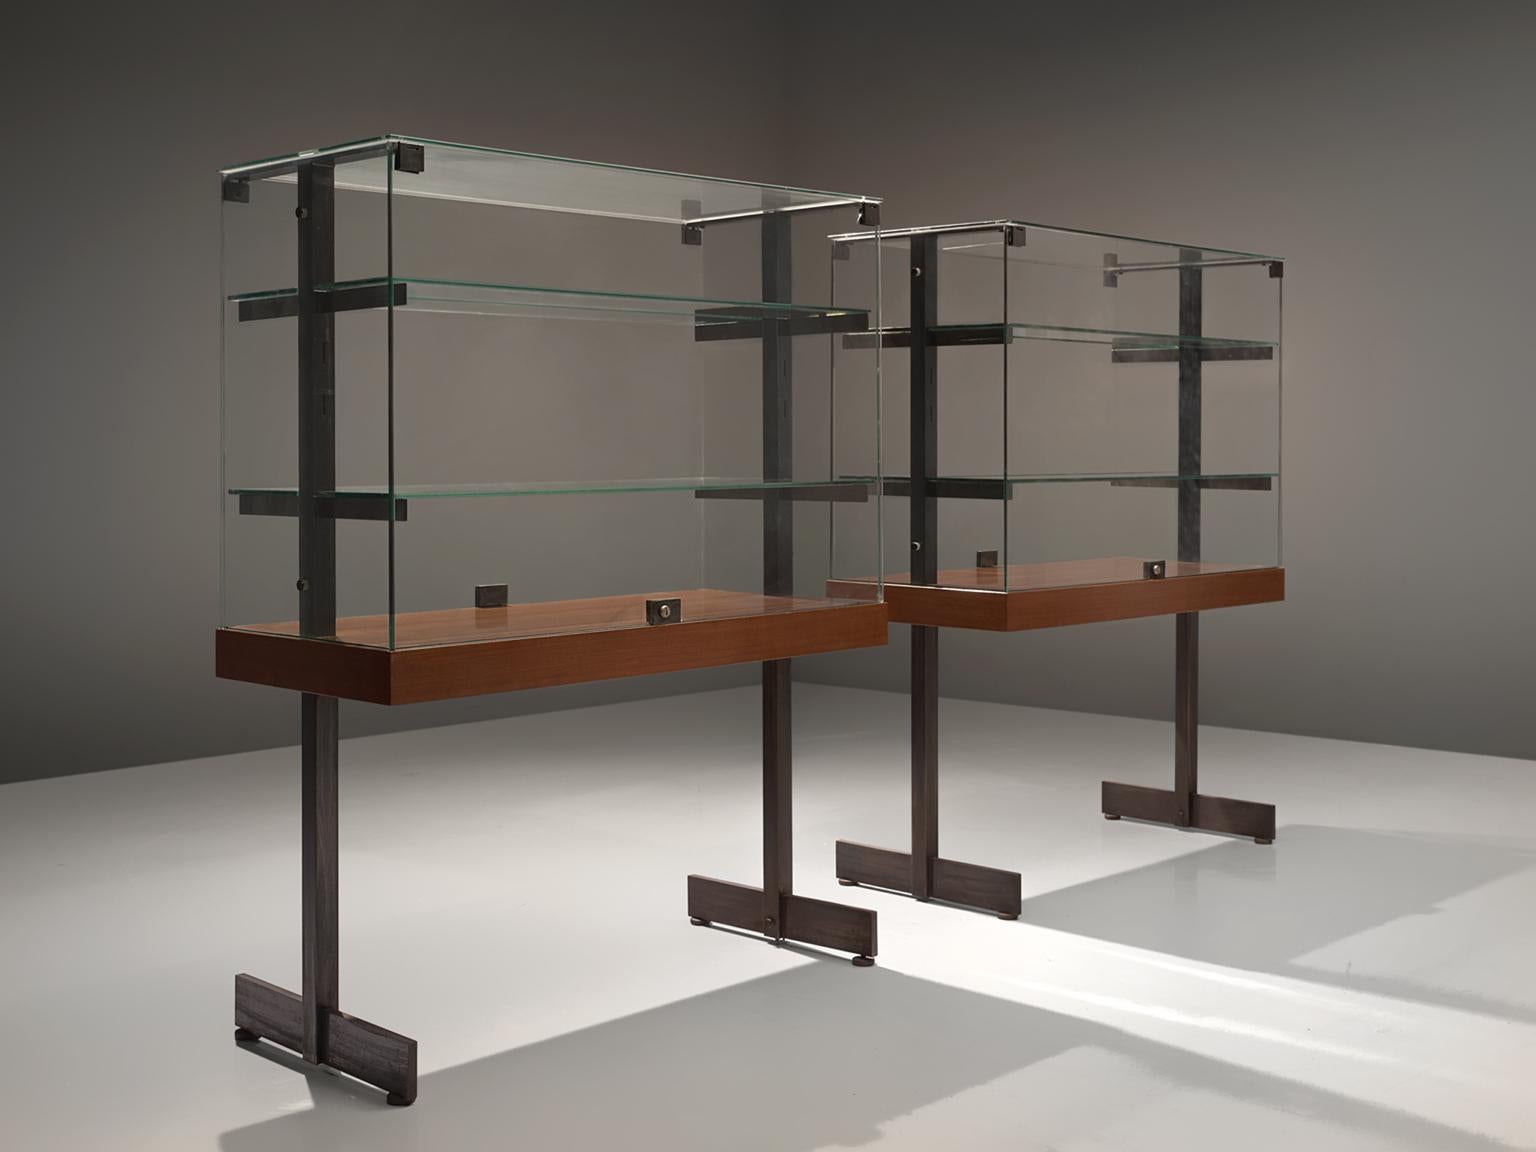 De Coene, large set of vitrines, teak, steel and glass, Belgium, 1960s. 

Modernist showcases with two doors on the side all original glass and in good condition. Accompanied with steel and wood frames. The vitrine features the Brutalist and